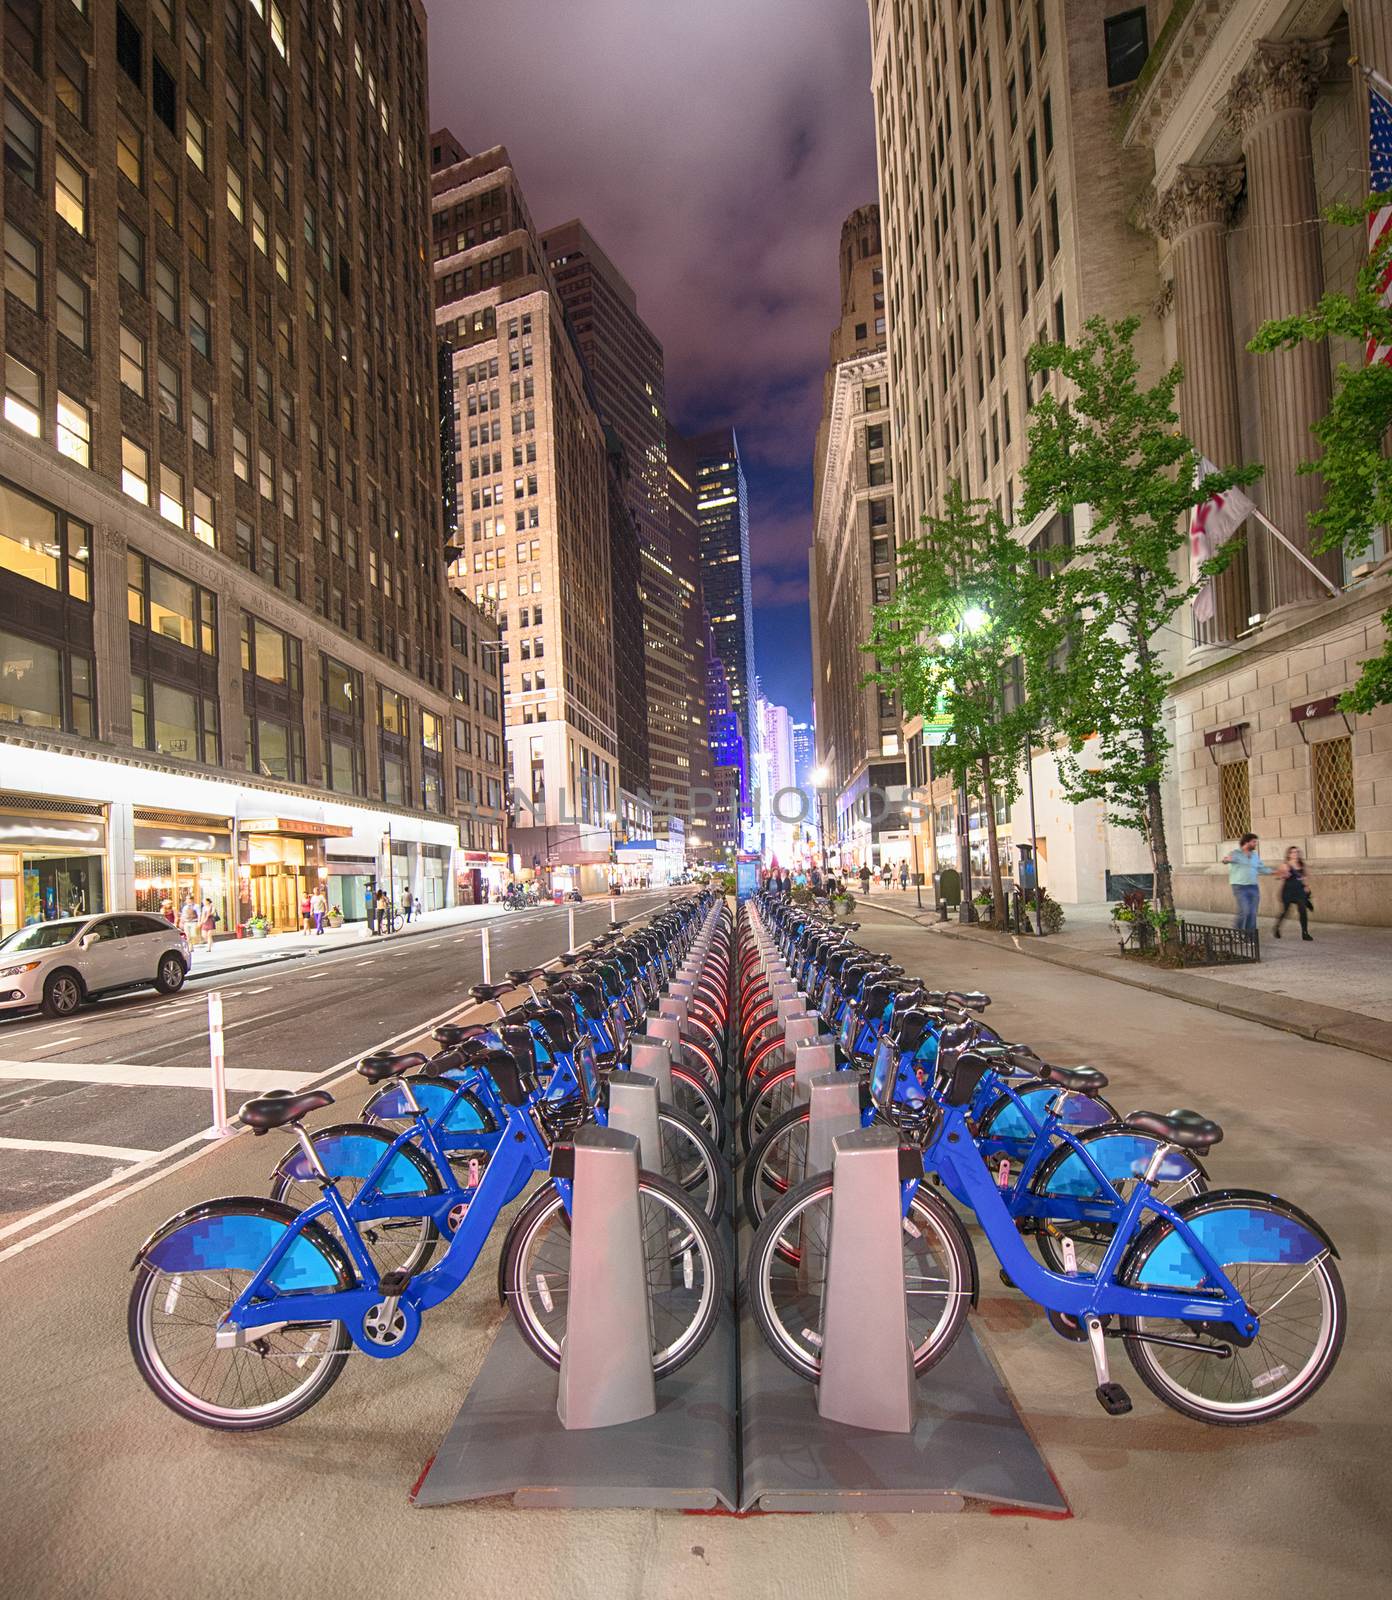 A row of blue bicycles on New York street at night by jovannig